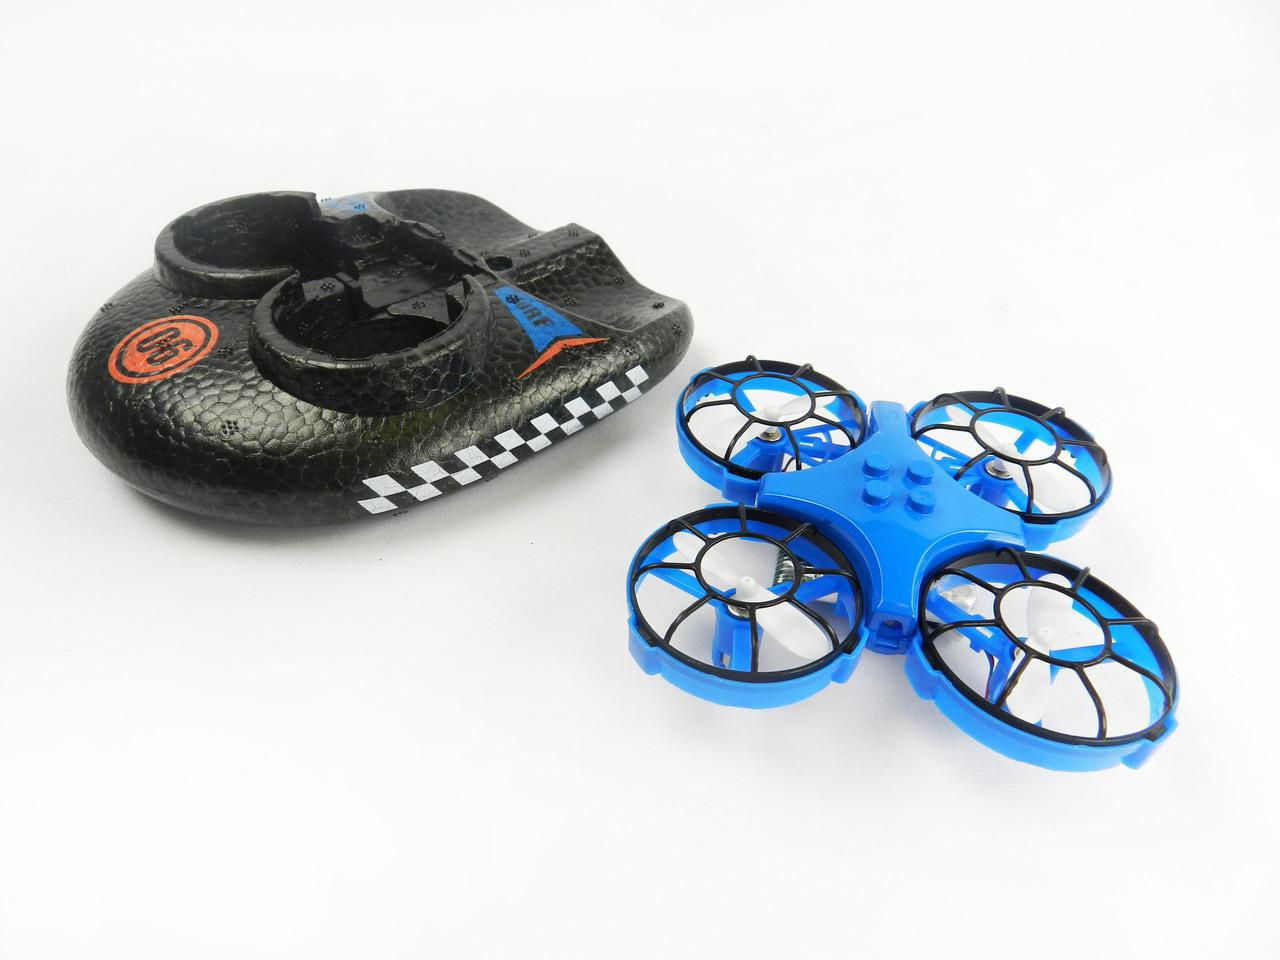 RC Hovercraft - 3 in 1 RC Drone/ Hovercraft/Sea-Land-Air/Quadcopter with 2.4Ghz Remote Control 3D Flip